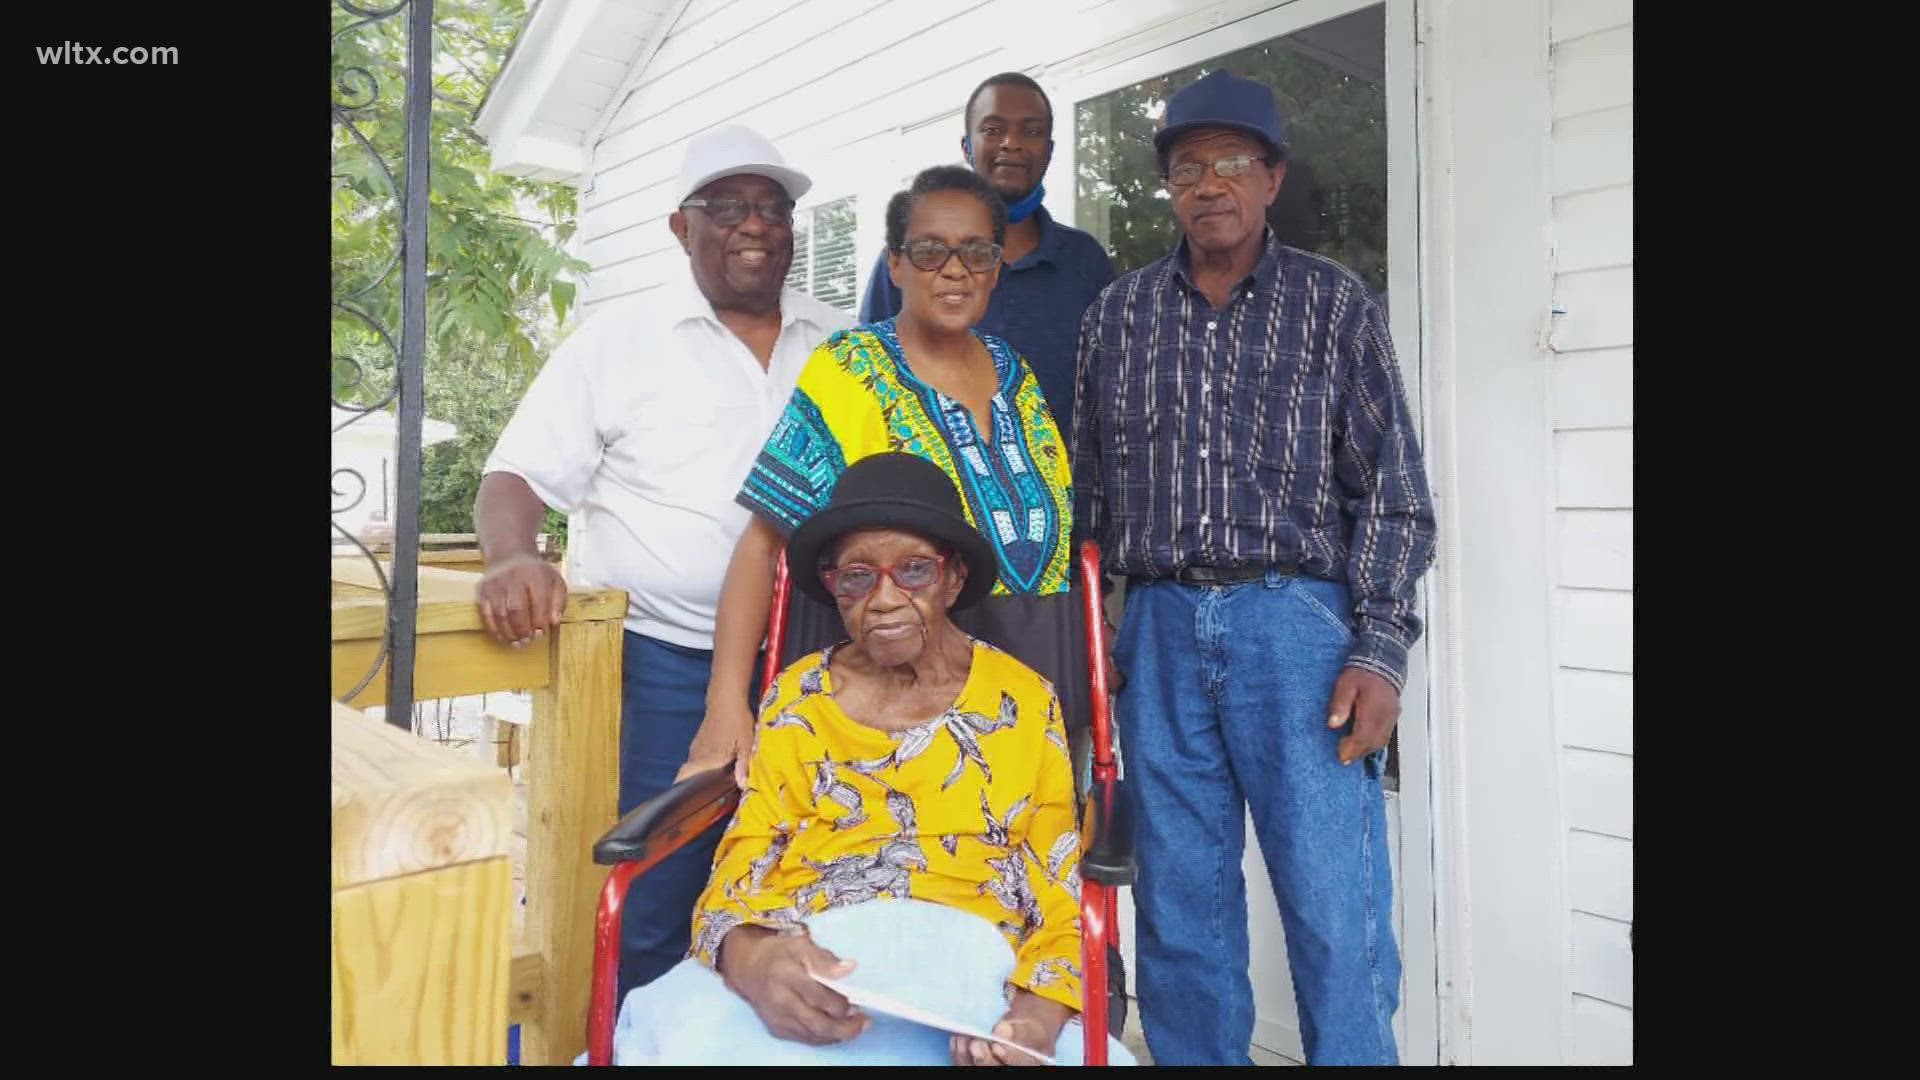 Thelma Strother turned 102 in Lexington on Tuesday and a bit of the town turned out to say "Happy Birthday"